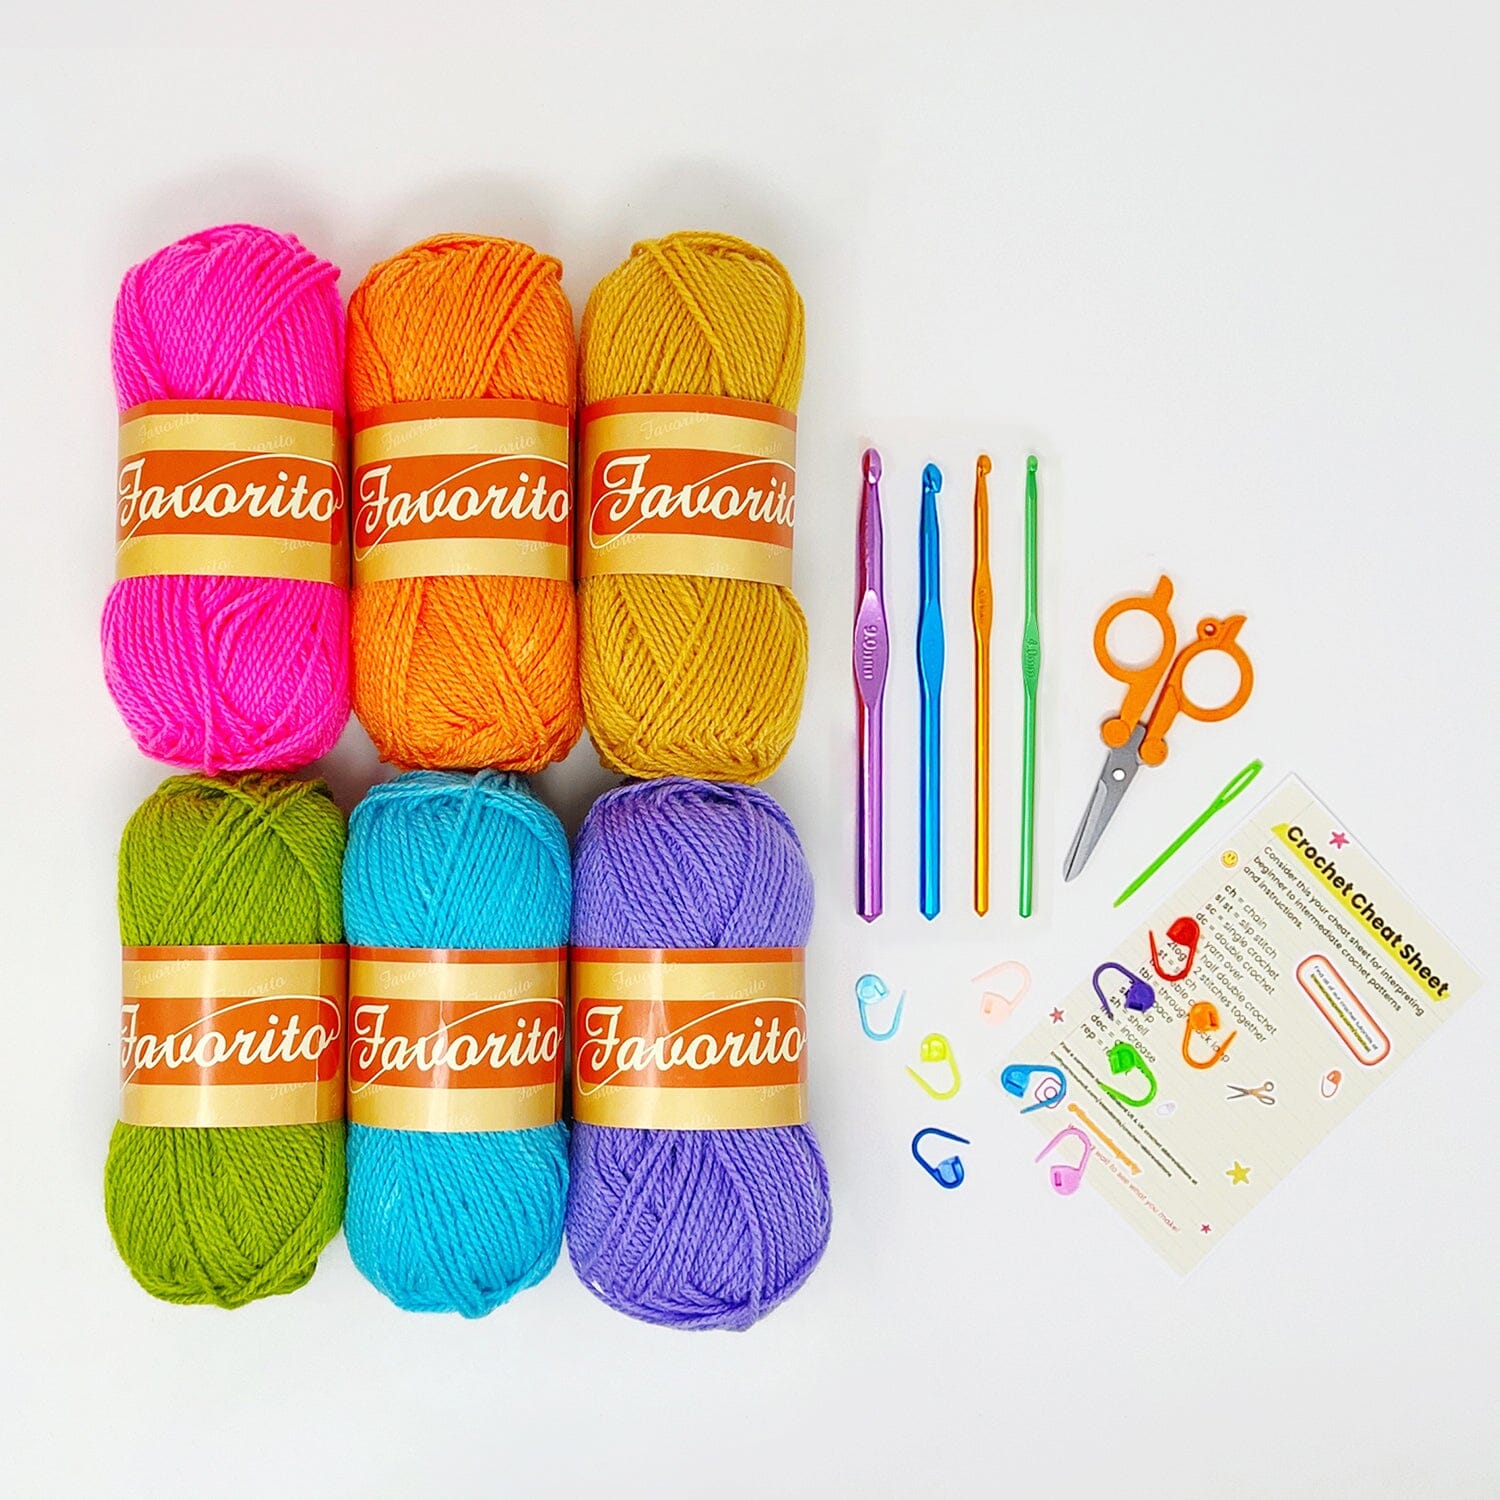 Yarn and Colors Party Kit Crochet Kit 